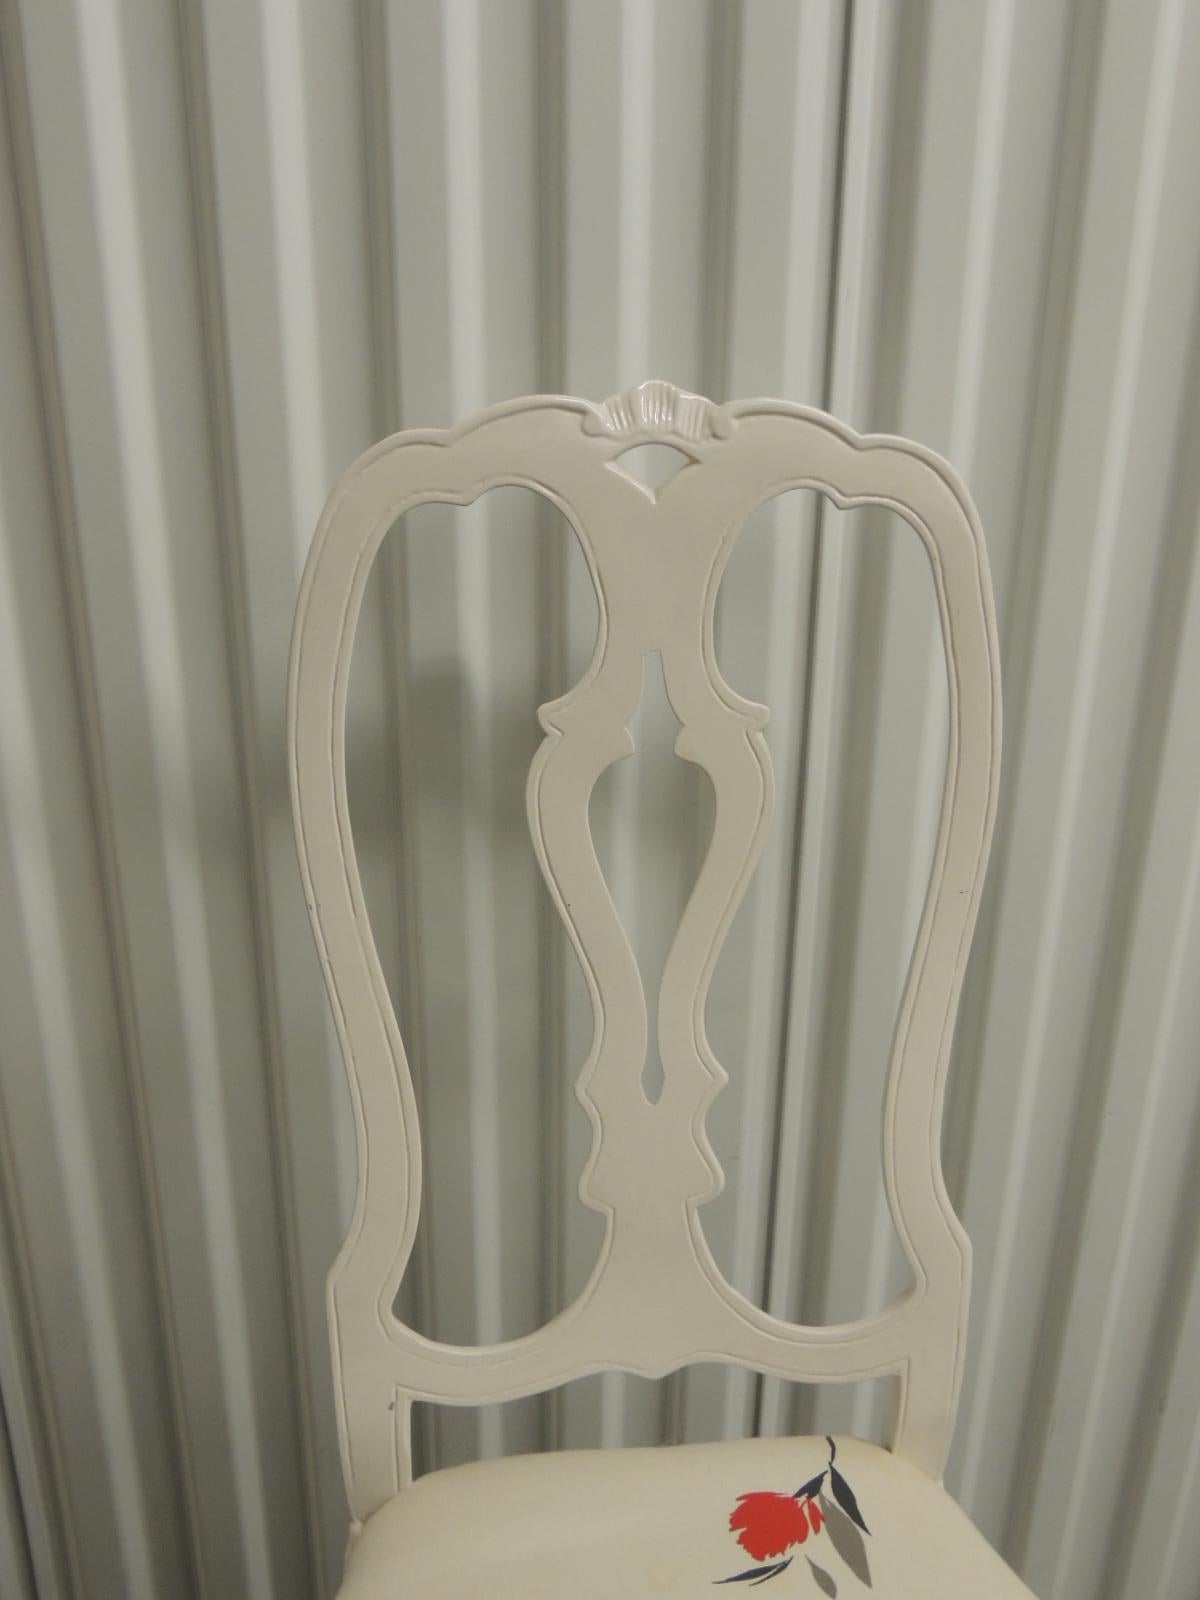 Pair of vintage white high-gloss metal chairs with traditional frames.
The chairs need to be recovered (seat screws up for easy re-upholstery.)
No scratches on the metal finished. They are perfect powder coated spray, almost like enamel. 
If